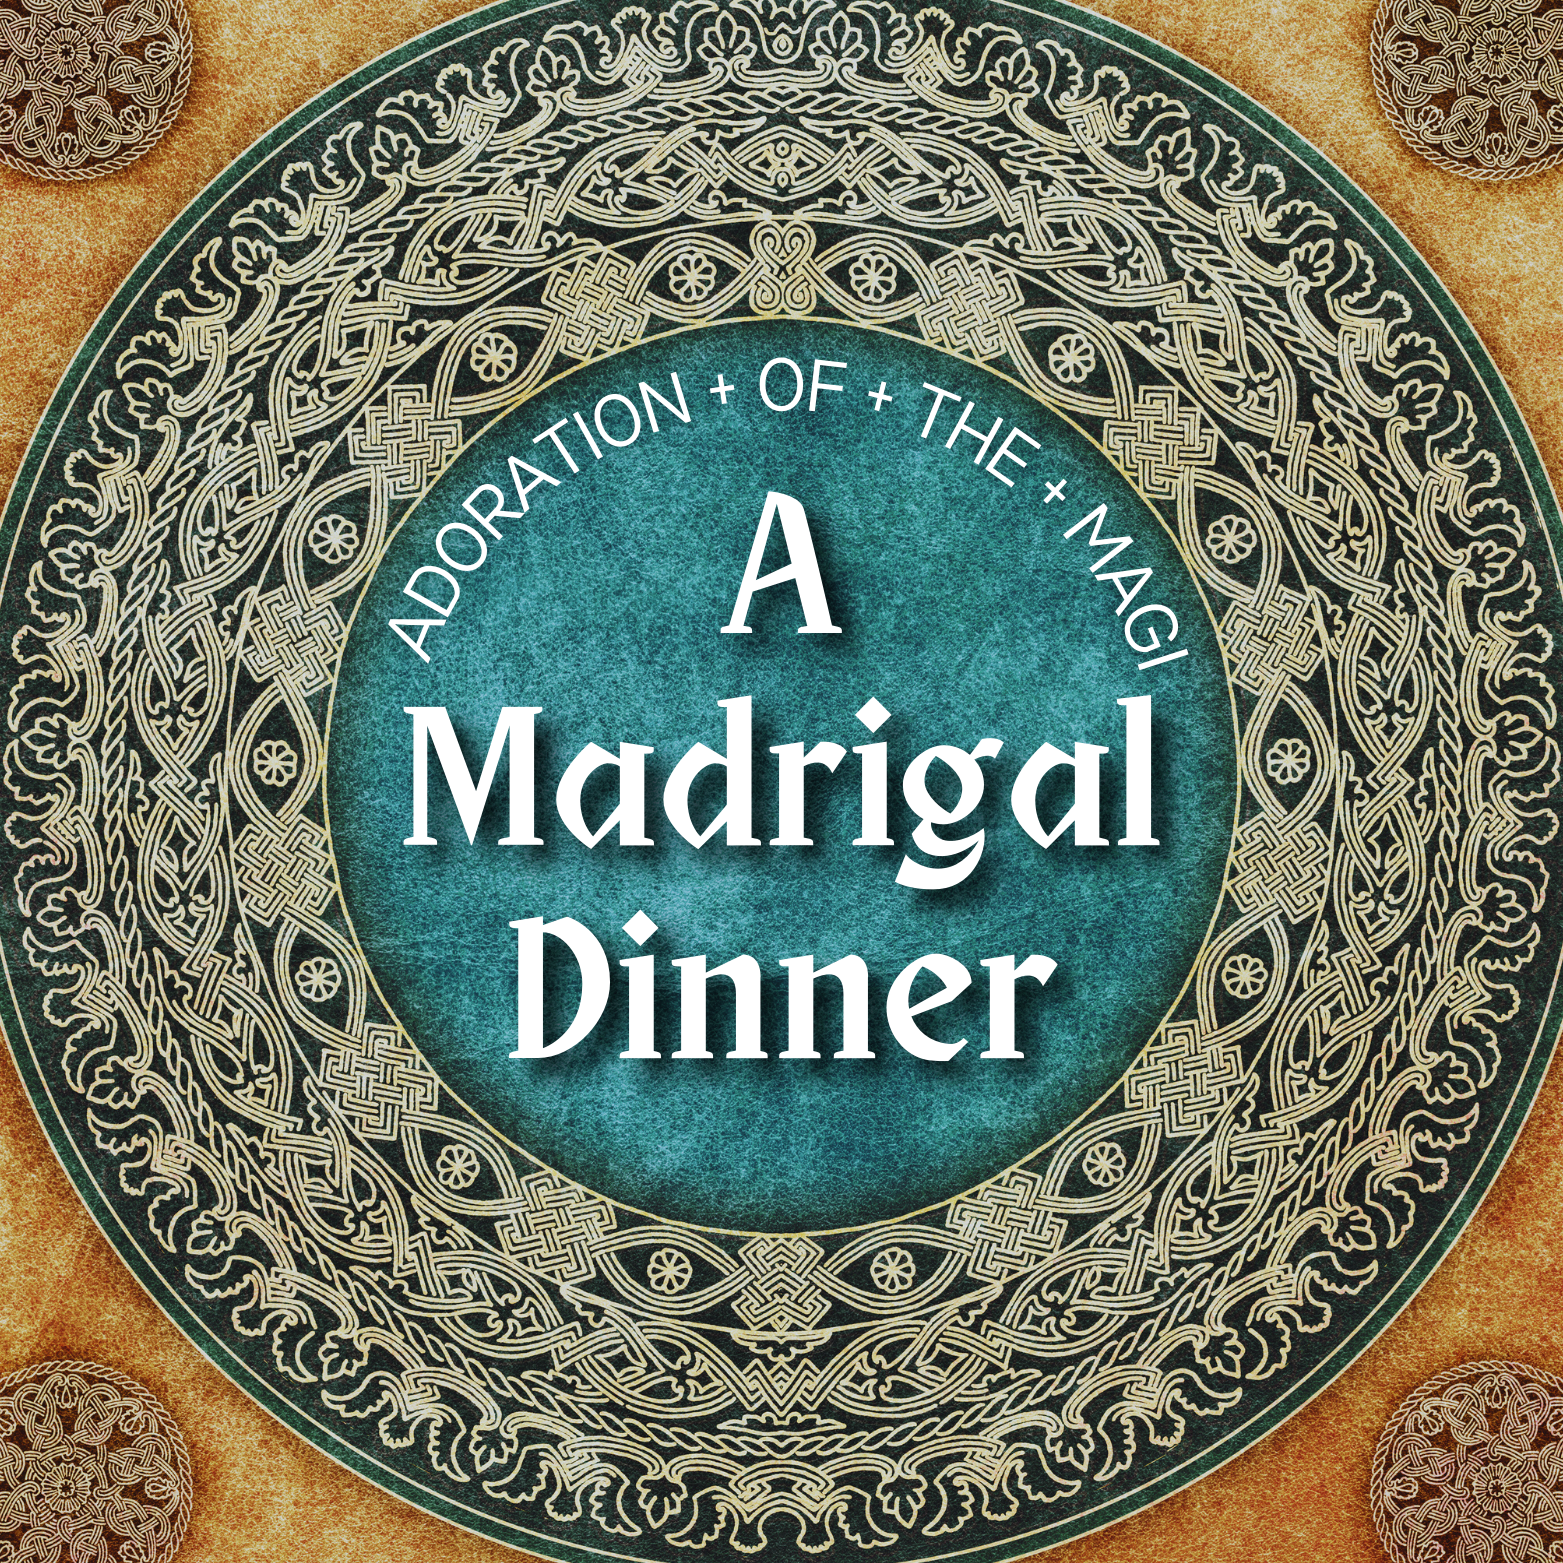 Adoration of the Magi A Madrigal Dinner